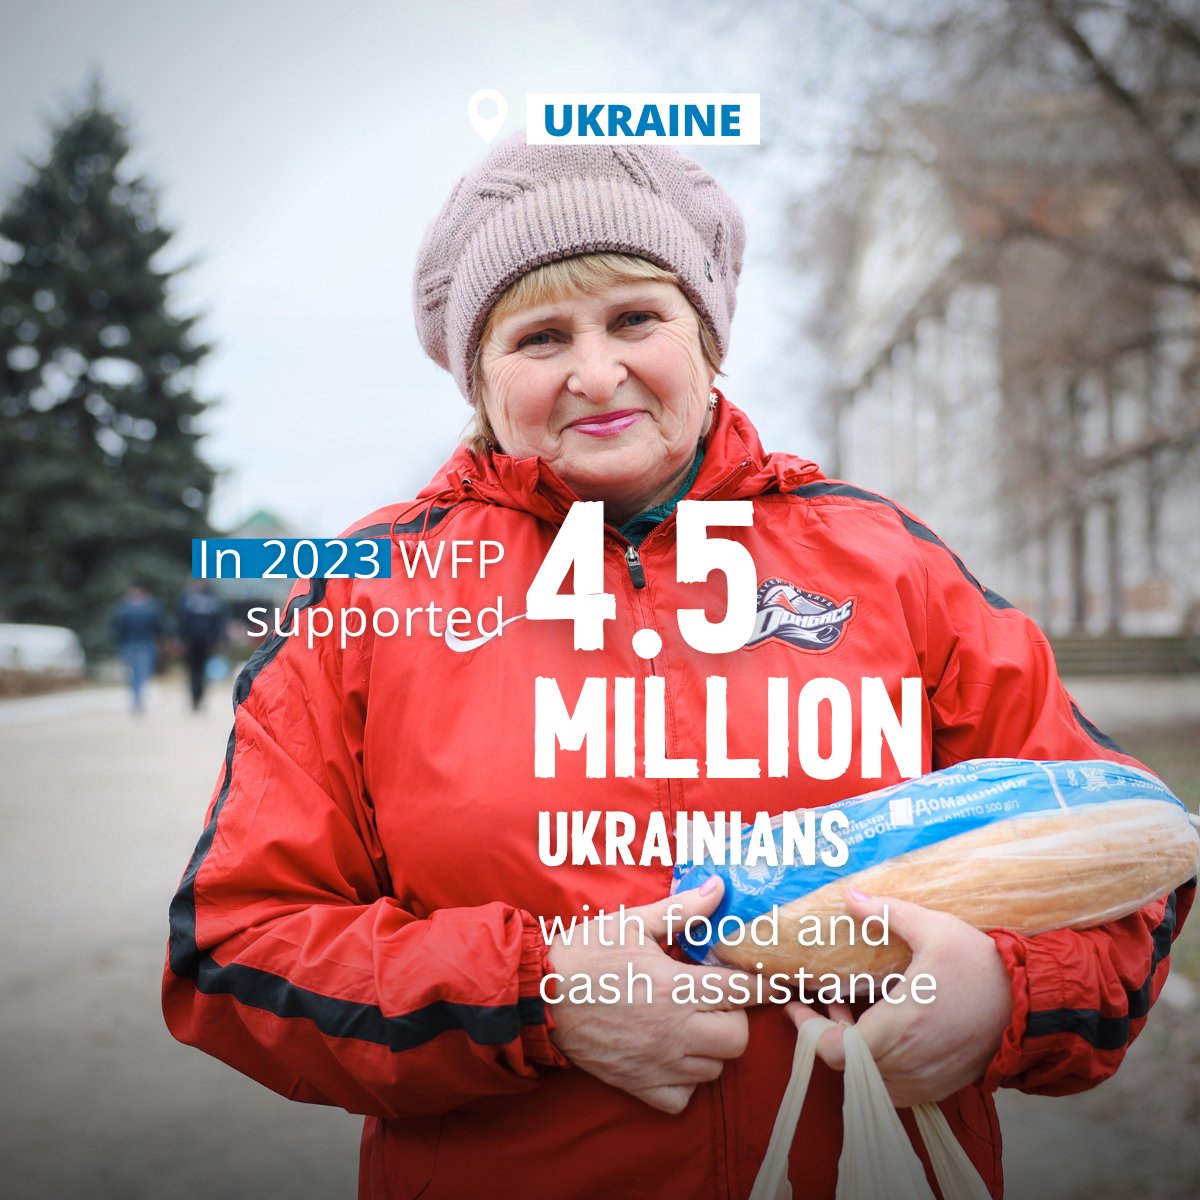 In 2023 @WFP and its local partners supported almost 4.5 million people in #Ukraine with food and cash assistance - 90% of them residing in frontline regions. Learn more in our 🇺🇦 Annual Country Report for 2023 wfp.org/operations/ann…